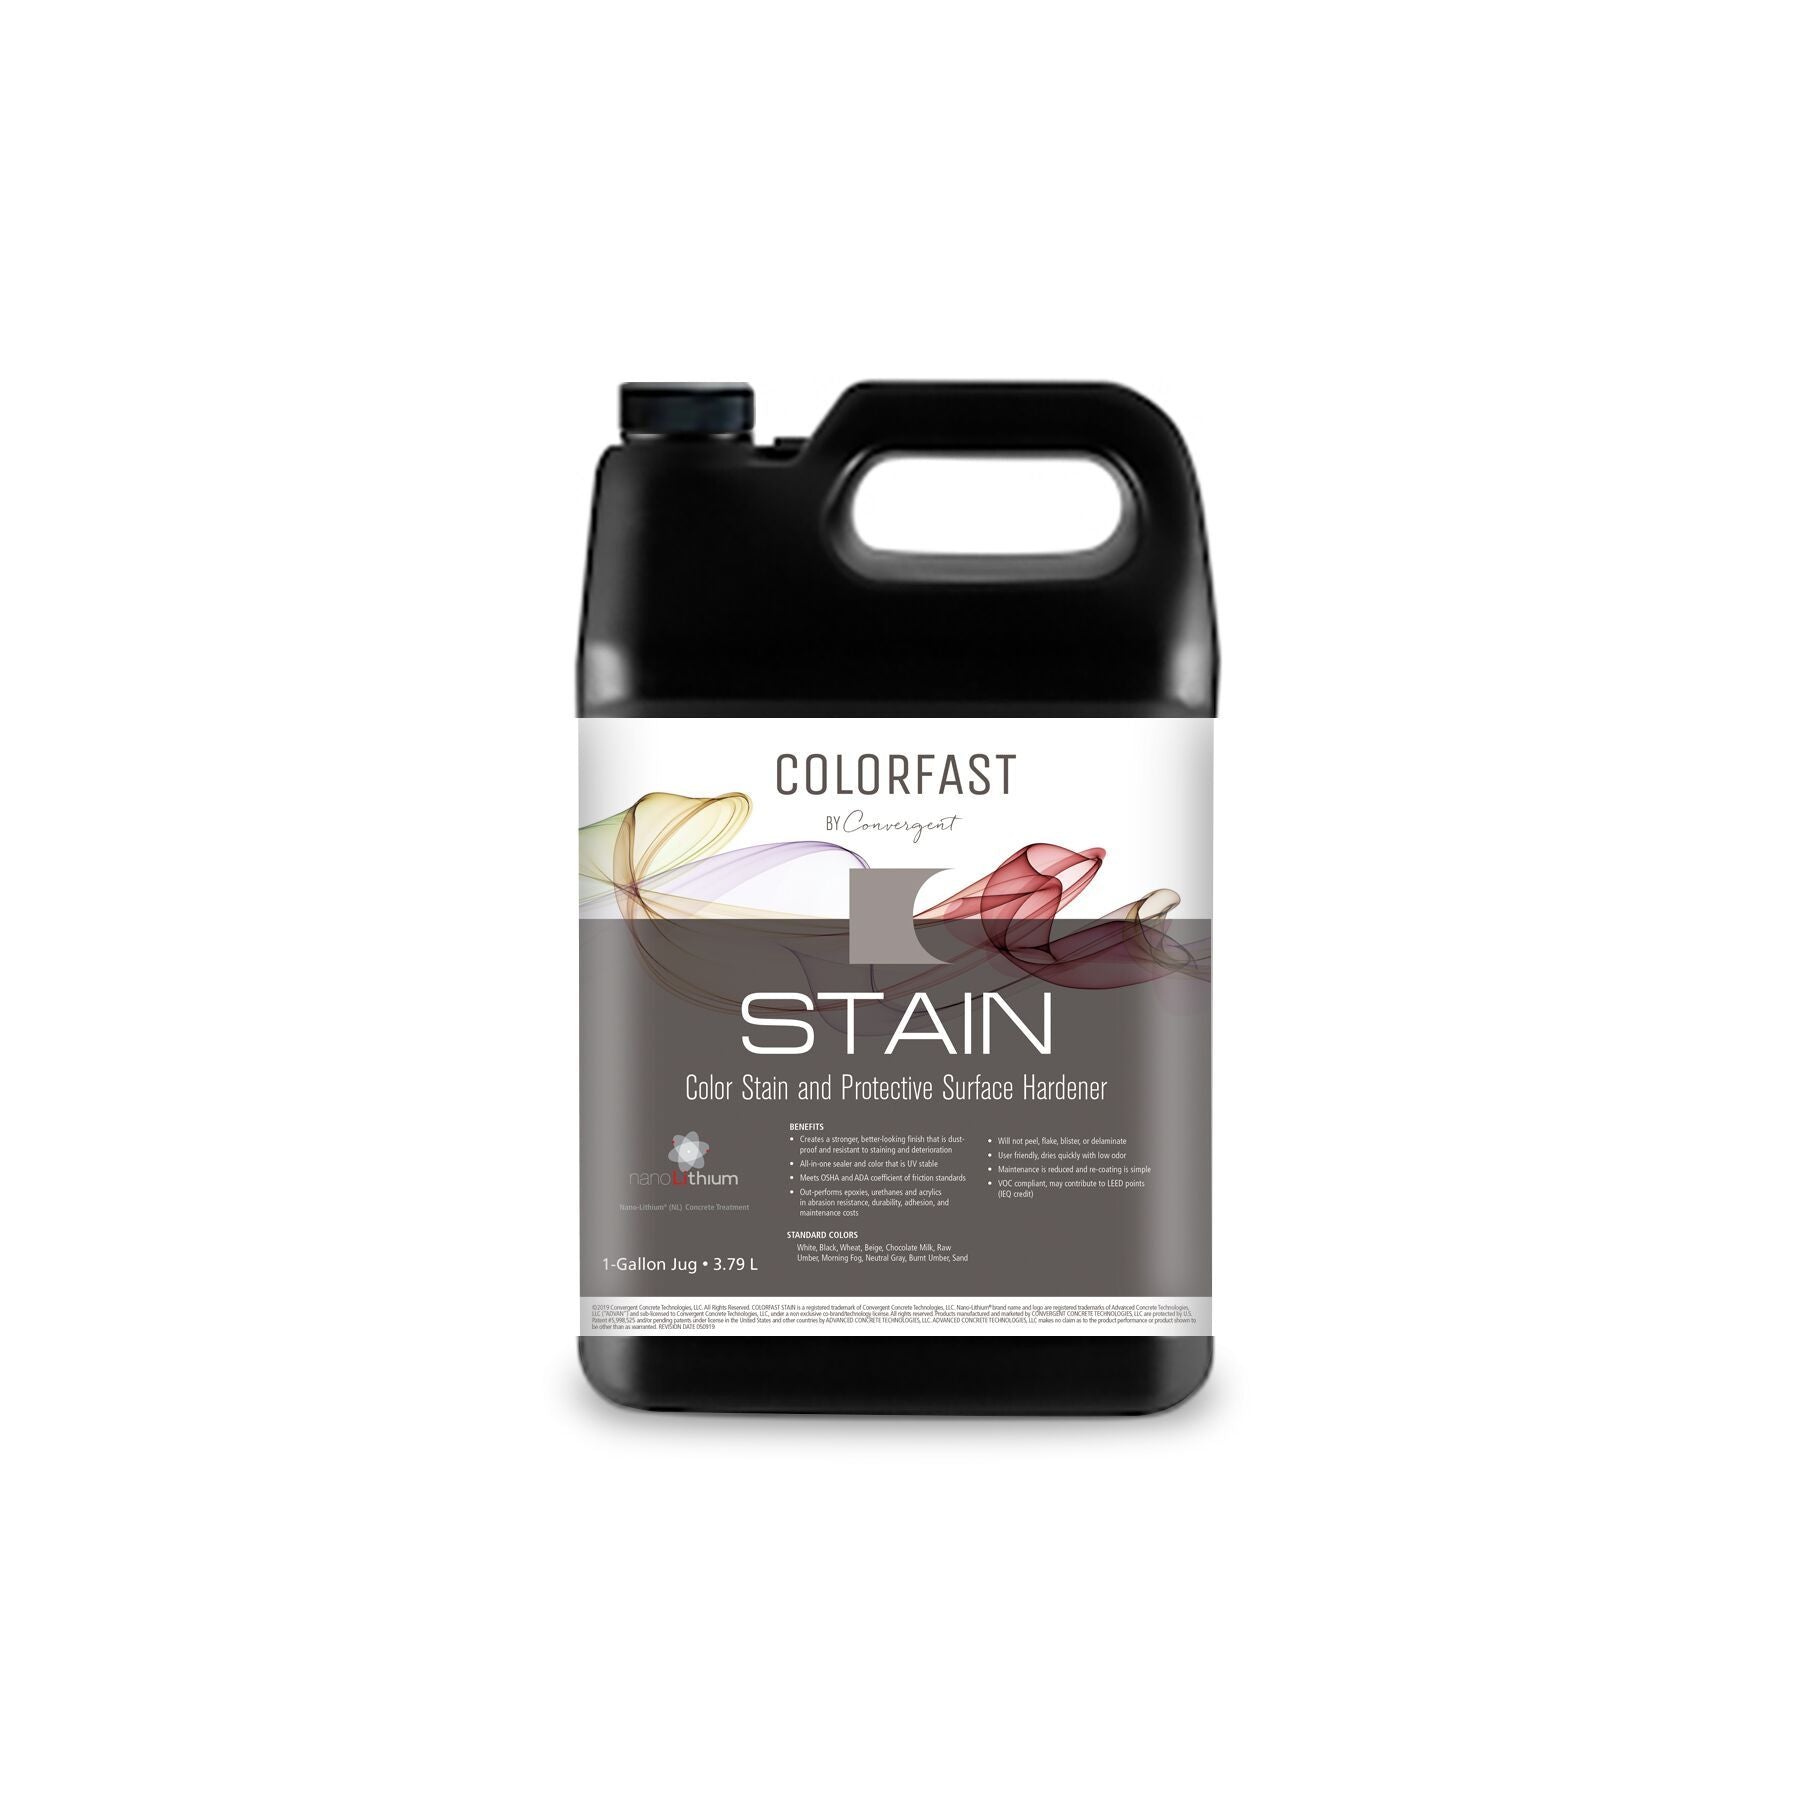 Colorfast Stain NEGRO (Galón)